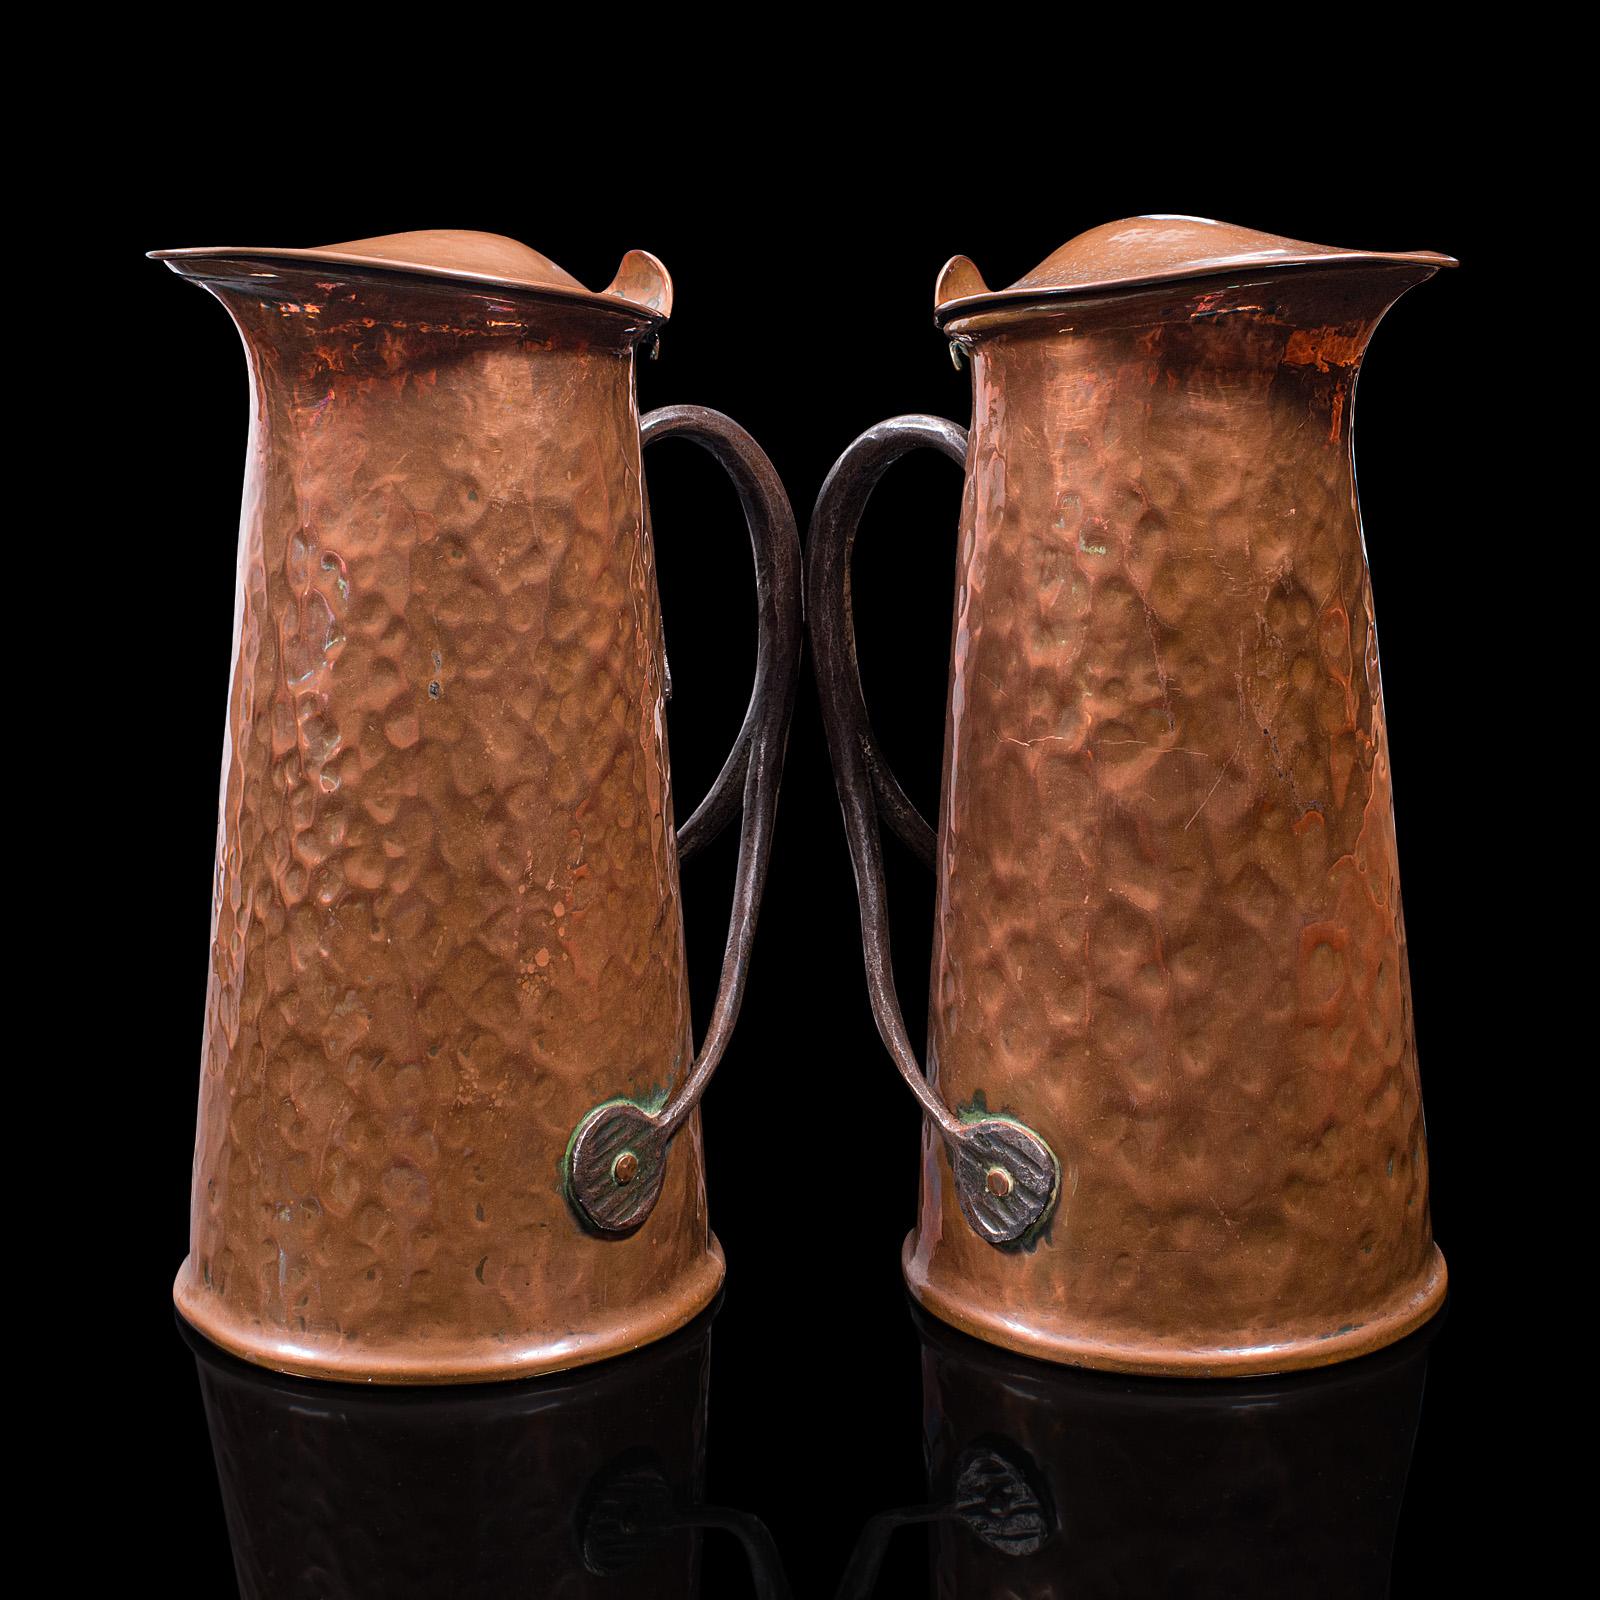 Pair of Antique Serving Jugs, English, Copper, Ewer, Arts & Crafts, Victorian 4